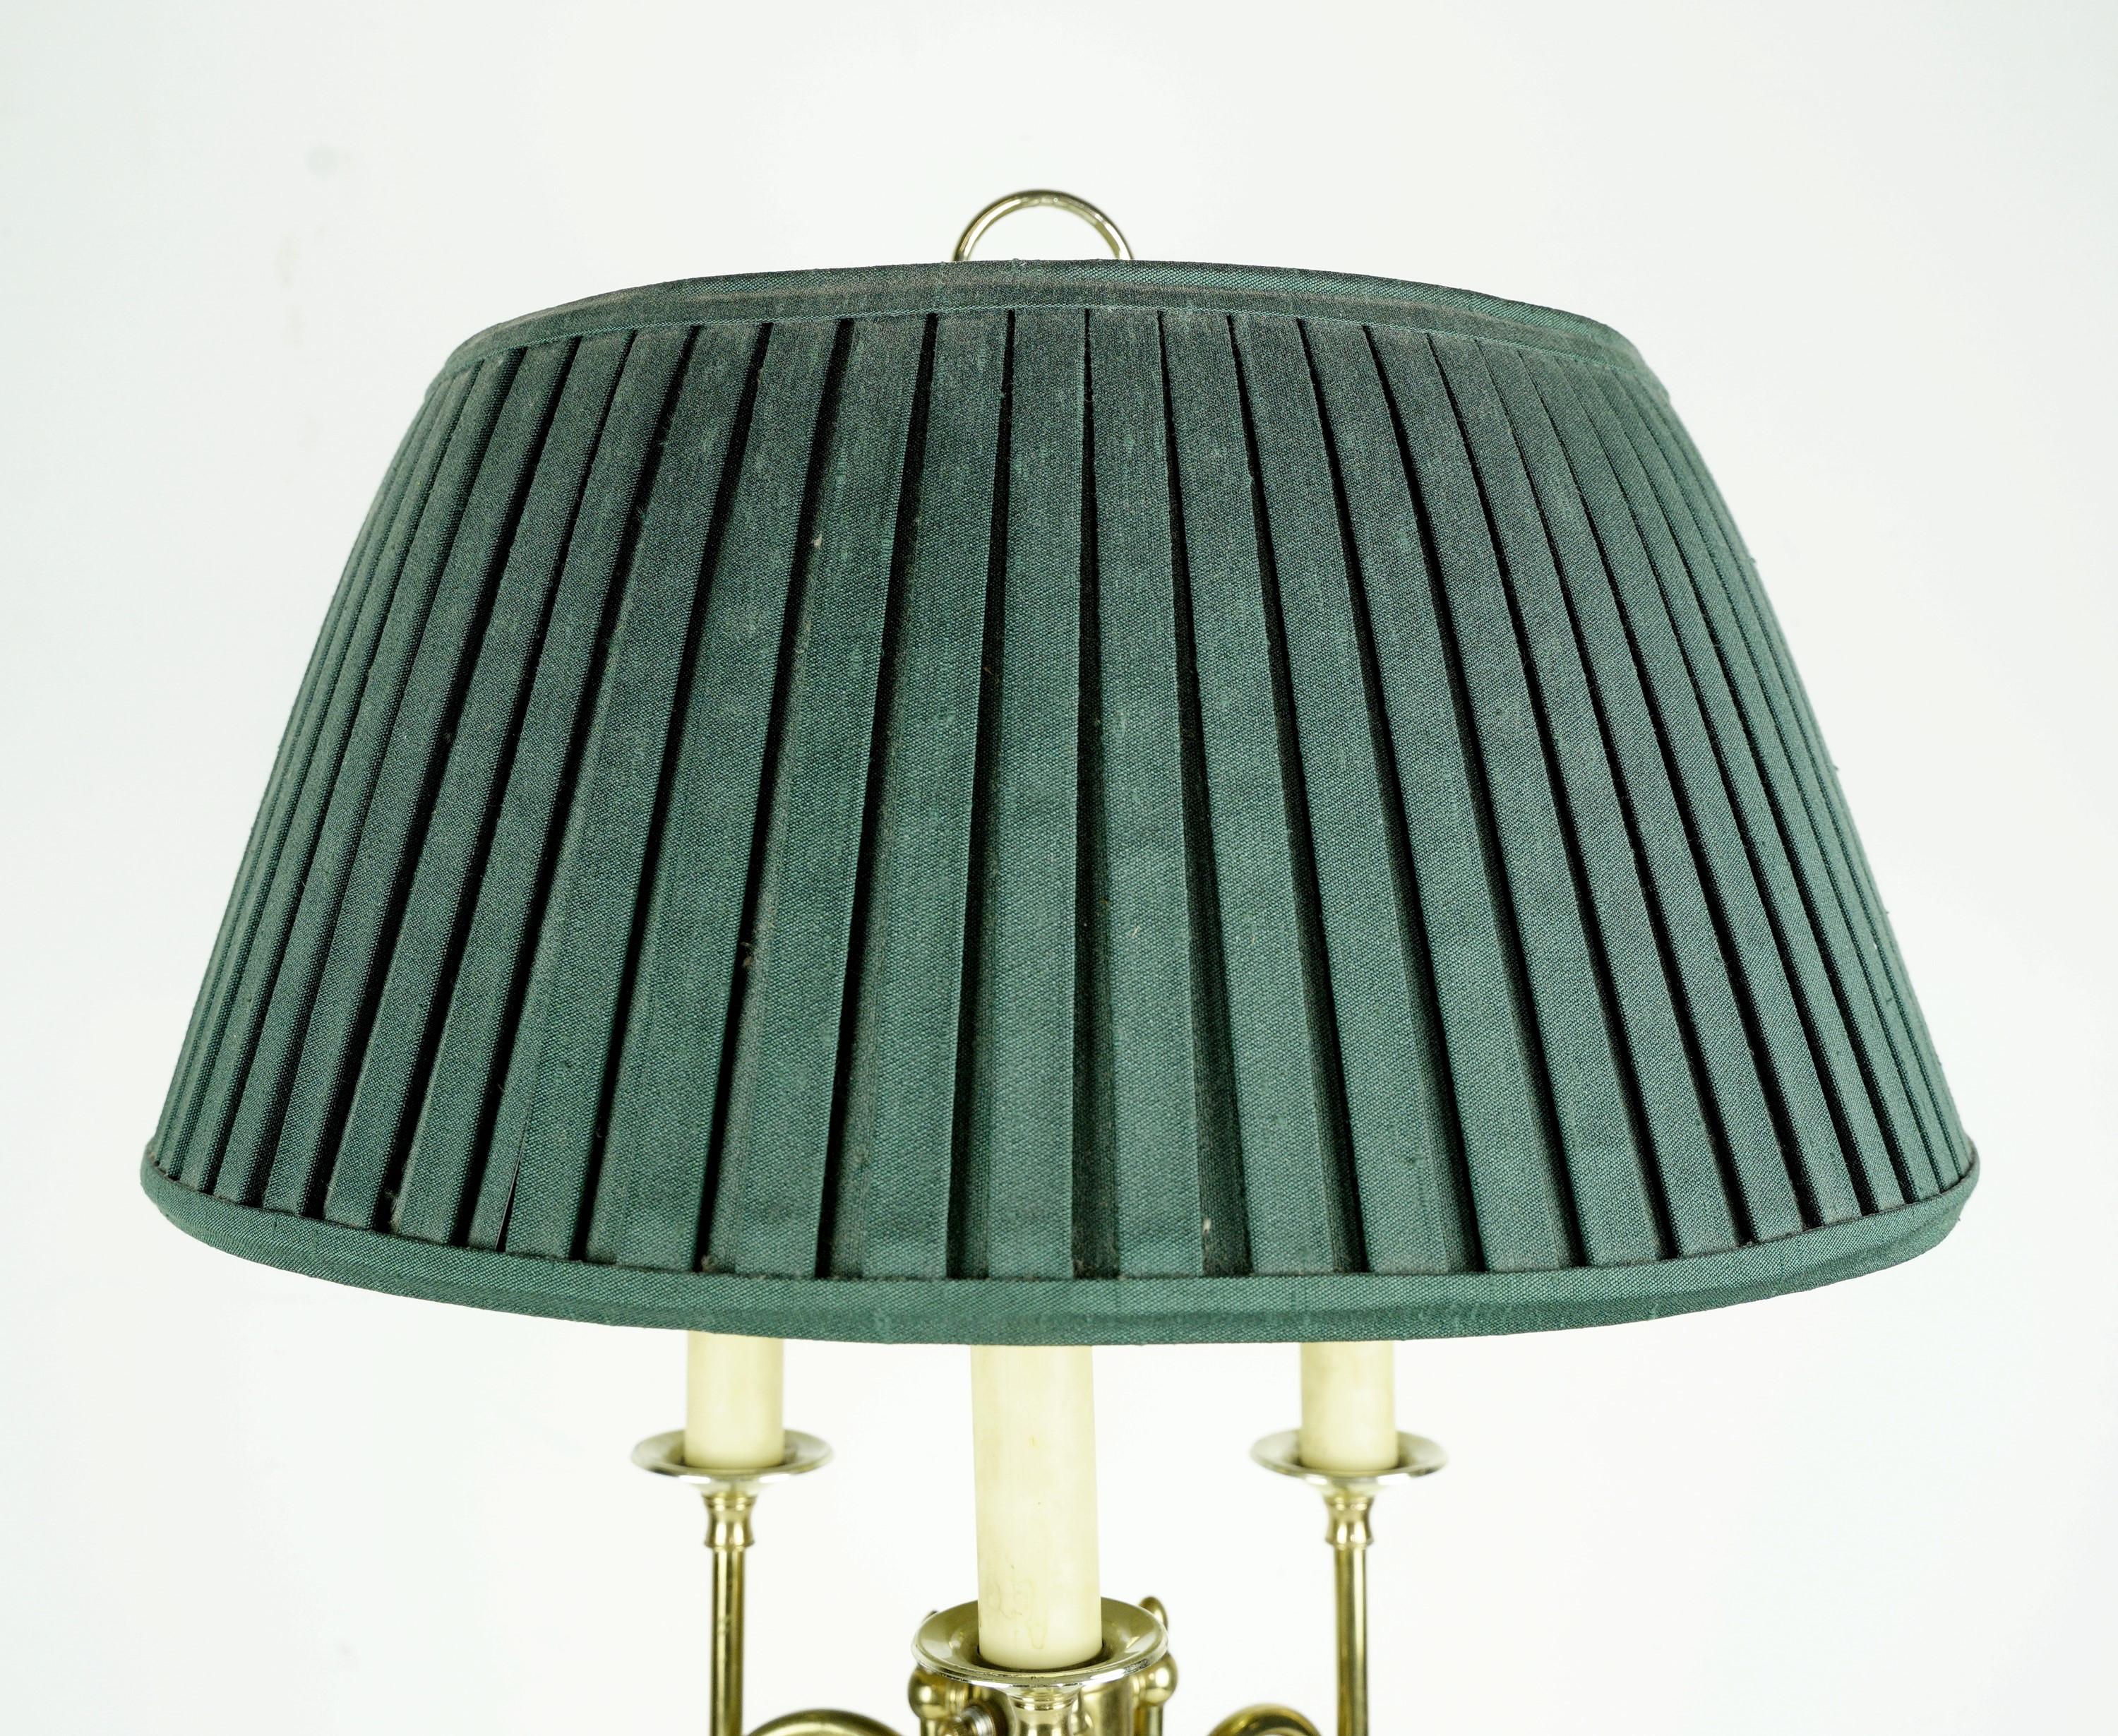 Colonial style table lamp with a polished brass finish and the original pleated green shade. Takes three standard candelabra light bulbs. Cleaned and restored. Small quantity available at time of posting. Please inquire. Priced each. Please note,